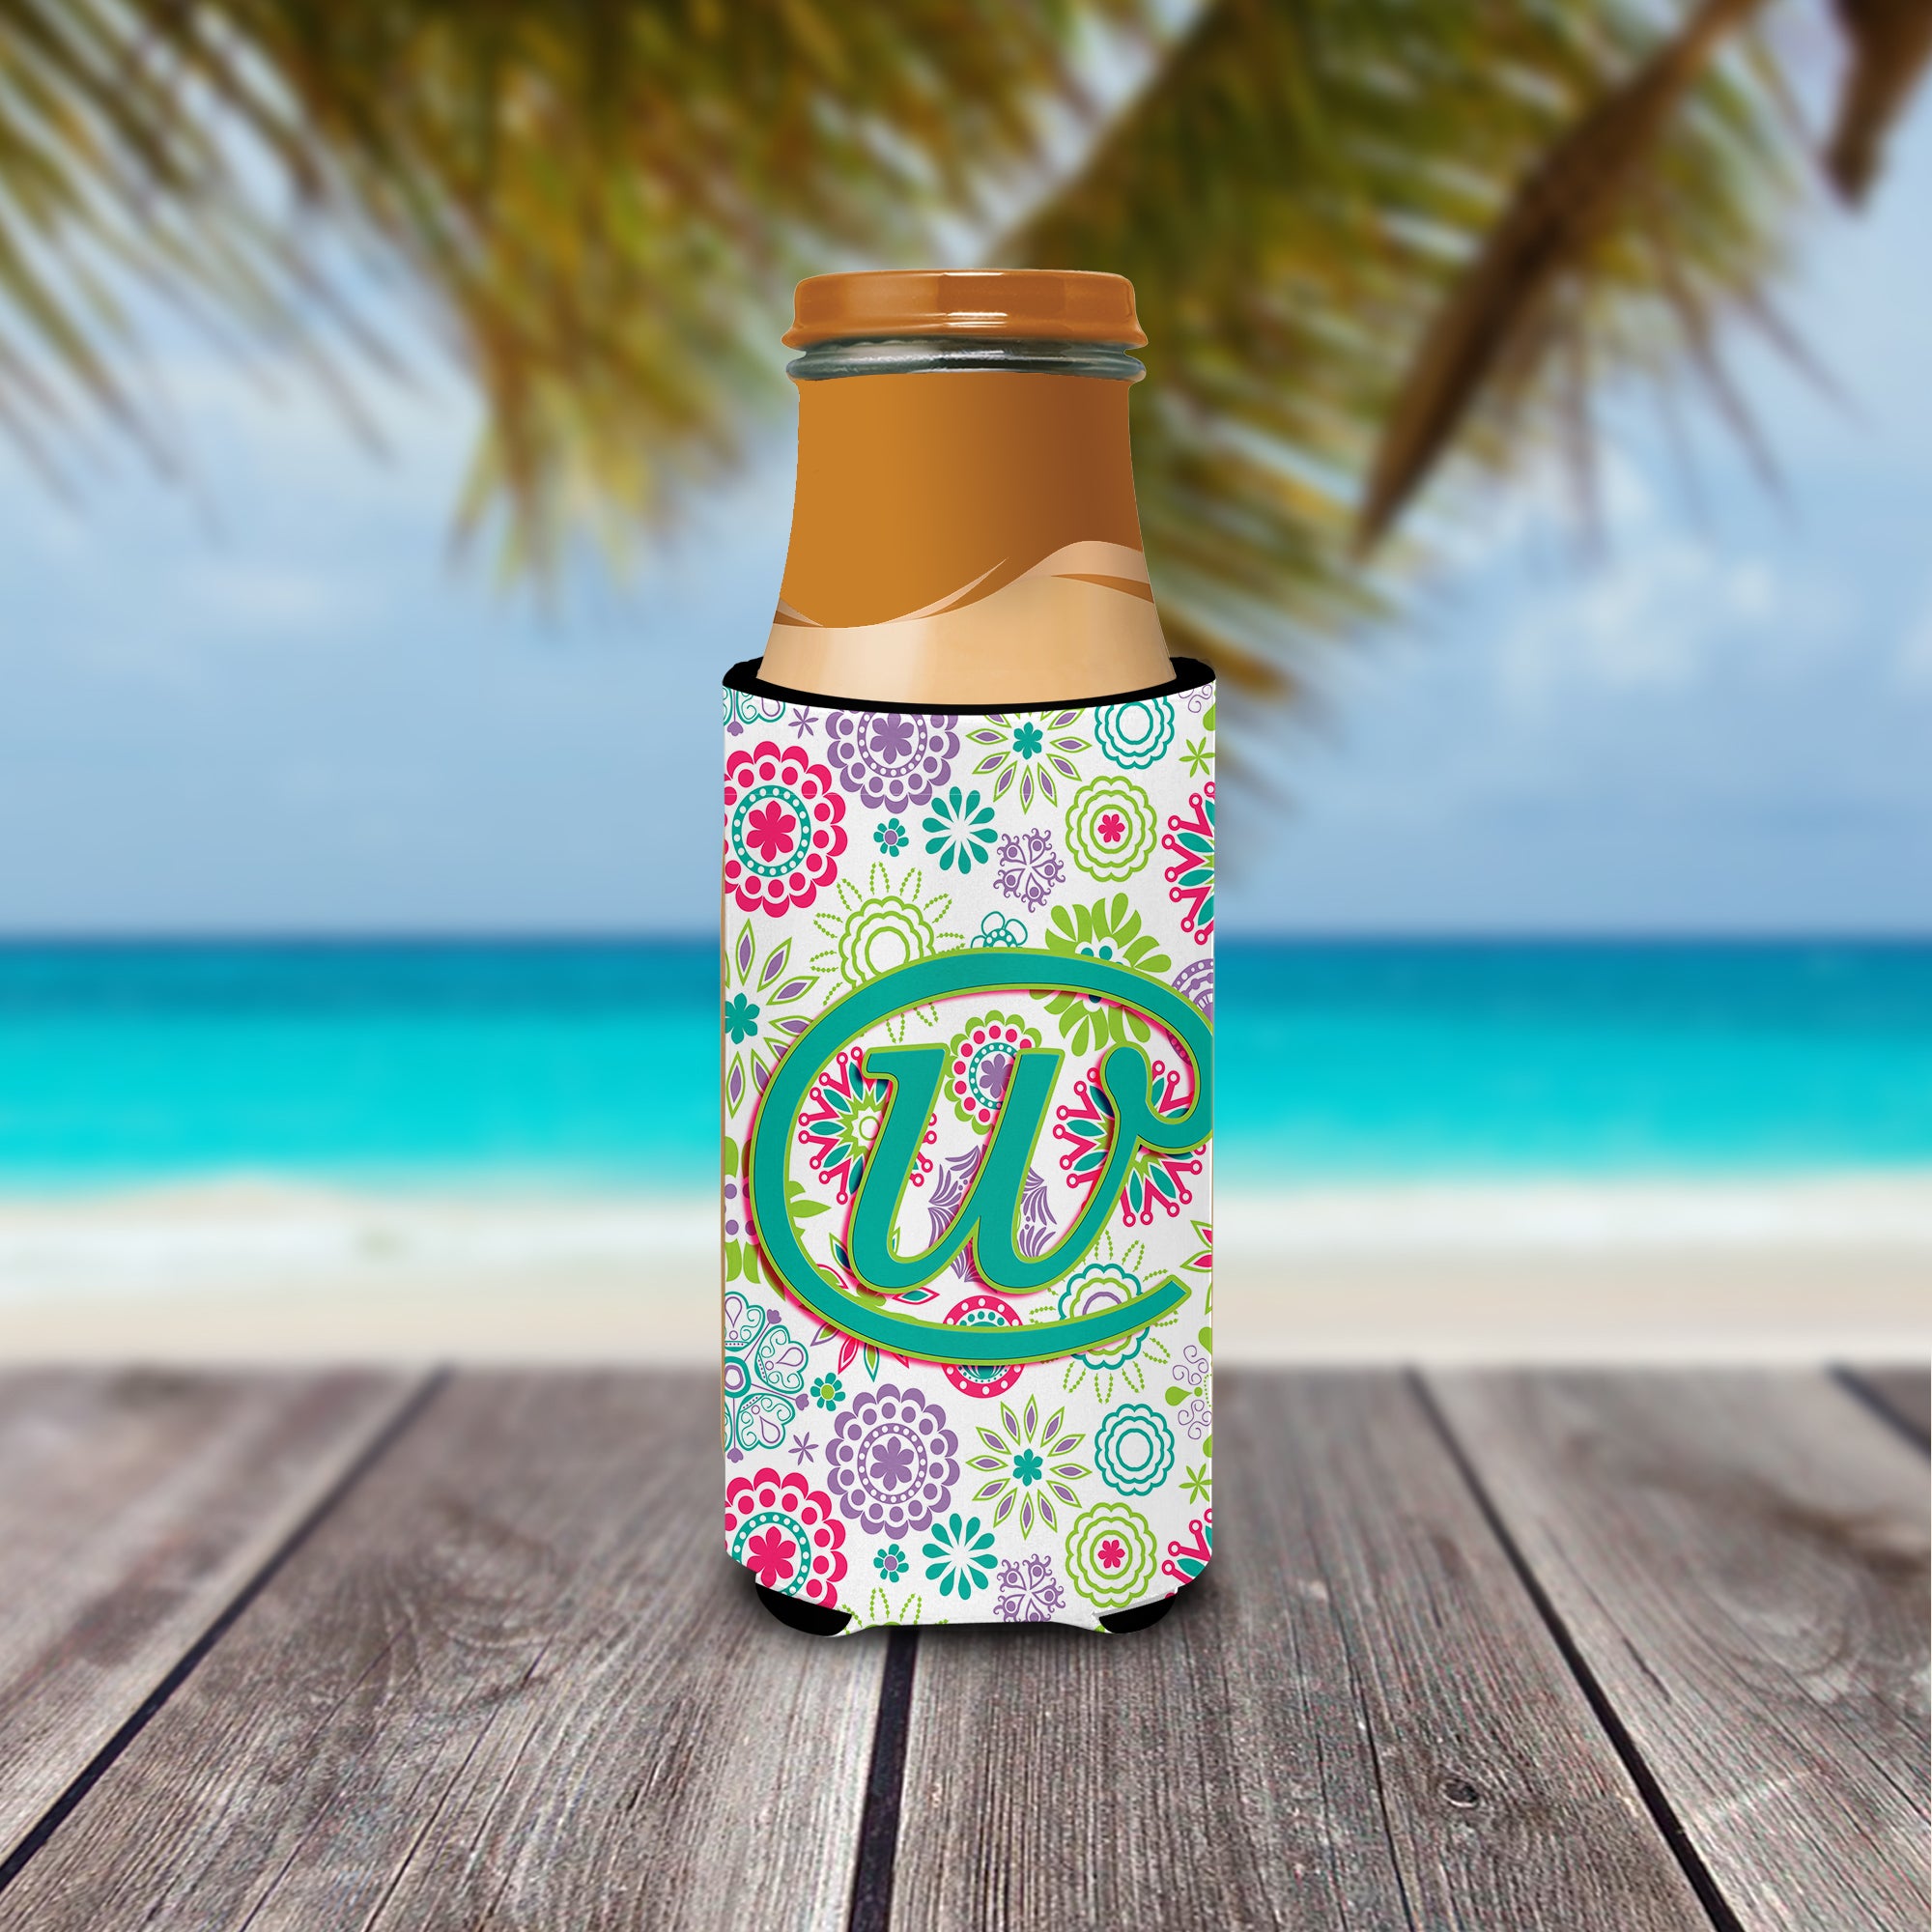 Letter W Flowers Pink Teal Green Initial Ultra Beverage Insulators for slim cans CJ2011-WMUK.